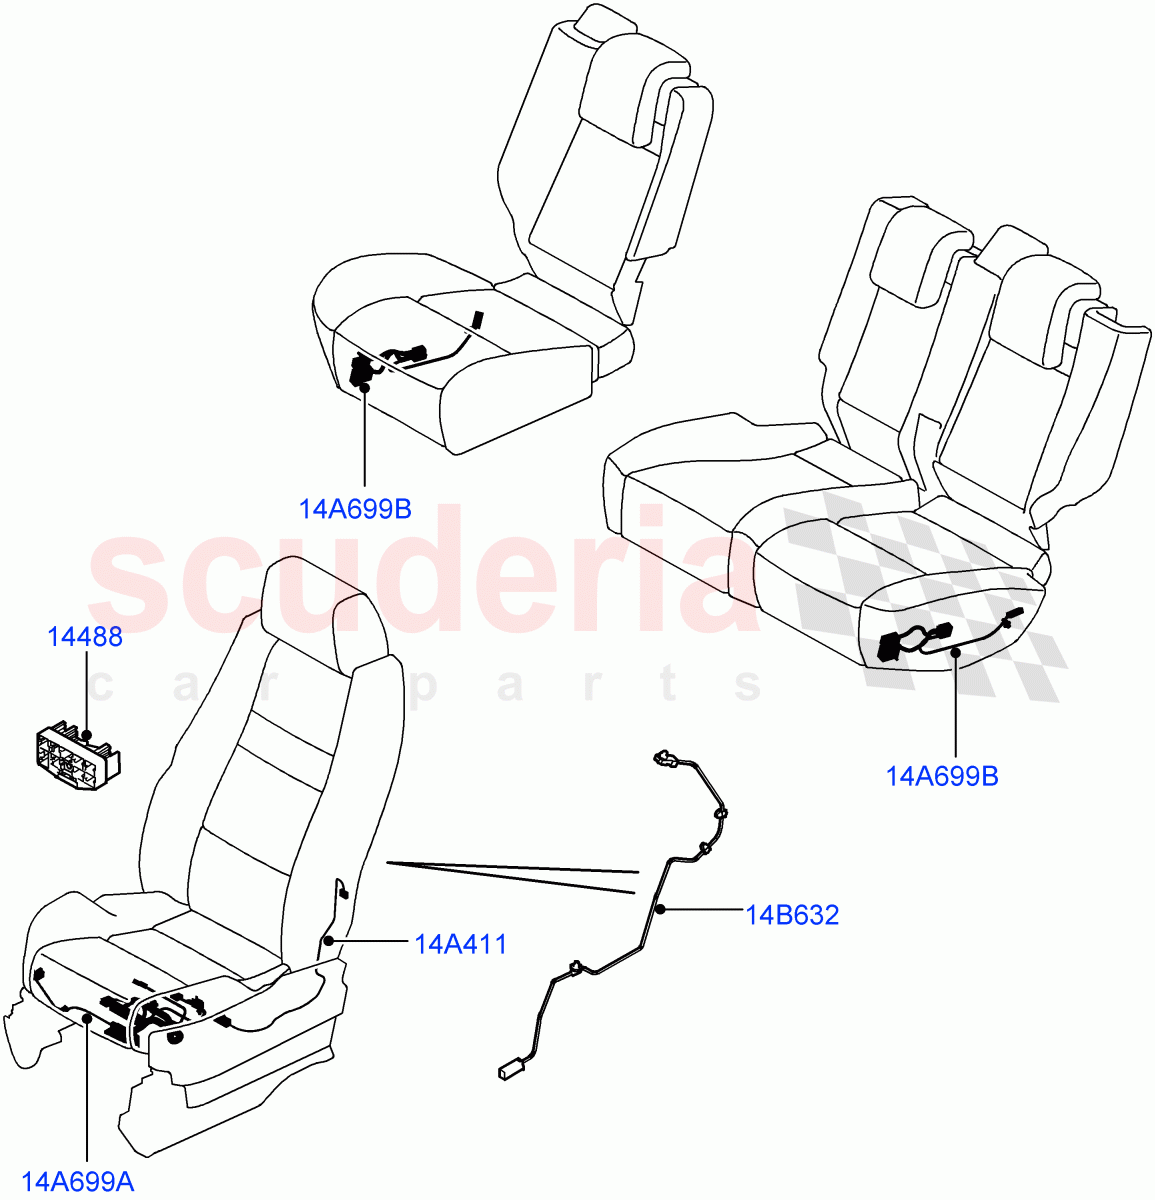 Electrical Wiring - Body And Rear(Seats)((V)TO9A999999) of Land Rover Land Rover Range Rover Sport (2005-2009) [4.2 Petrol V8 Supercharged]